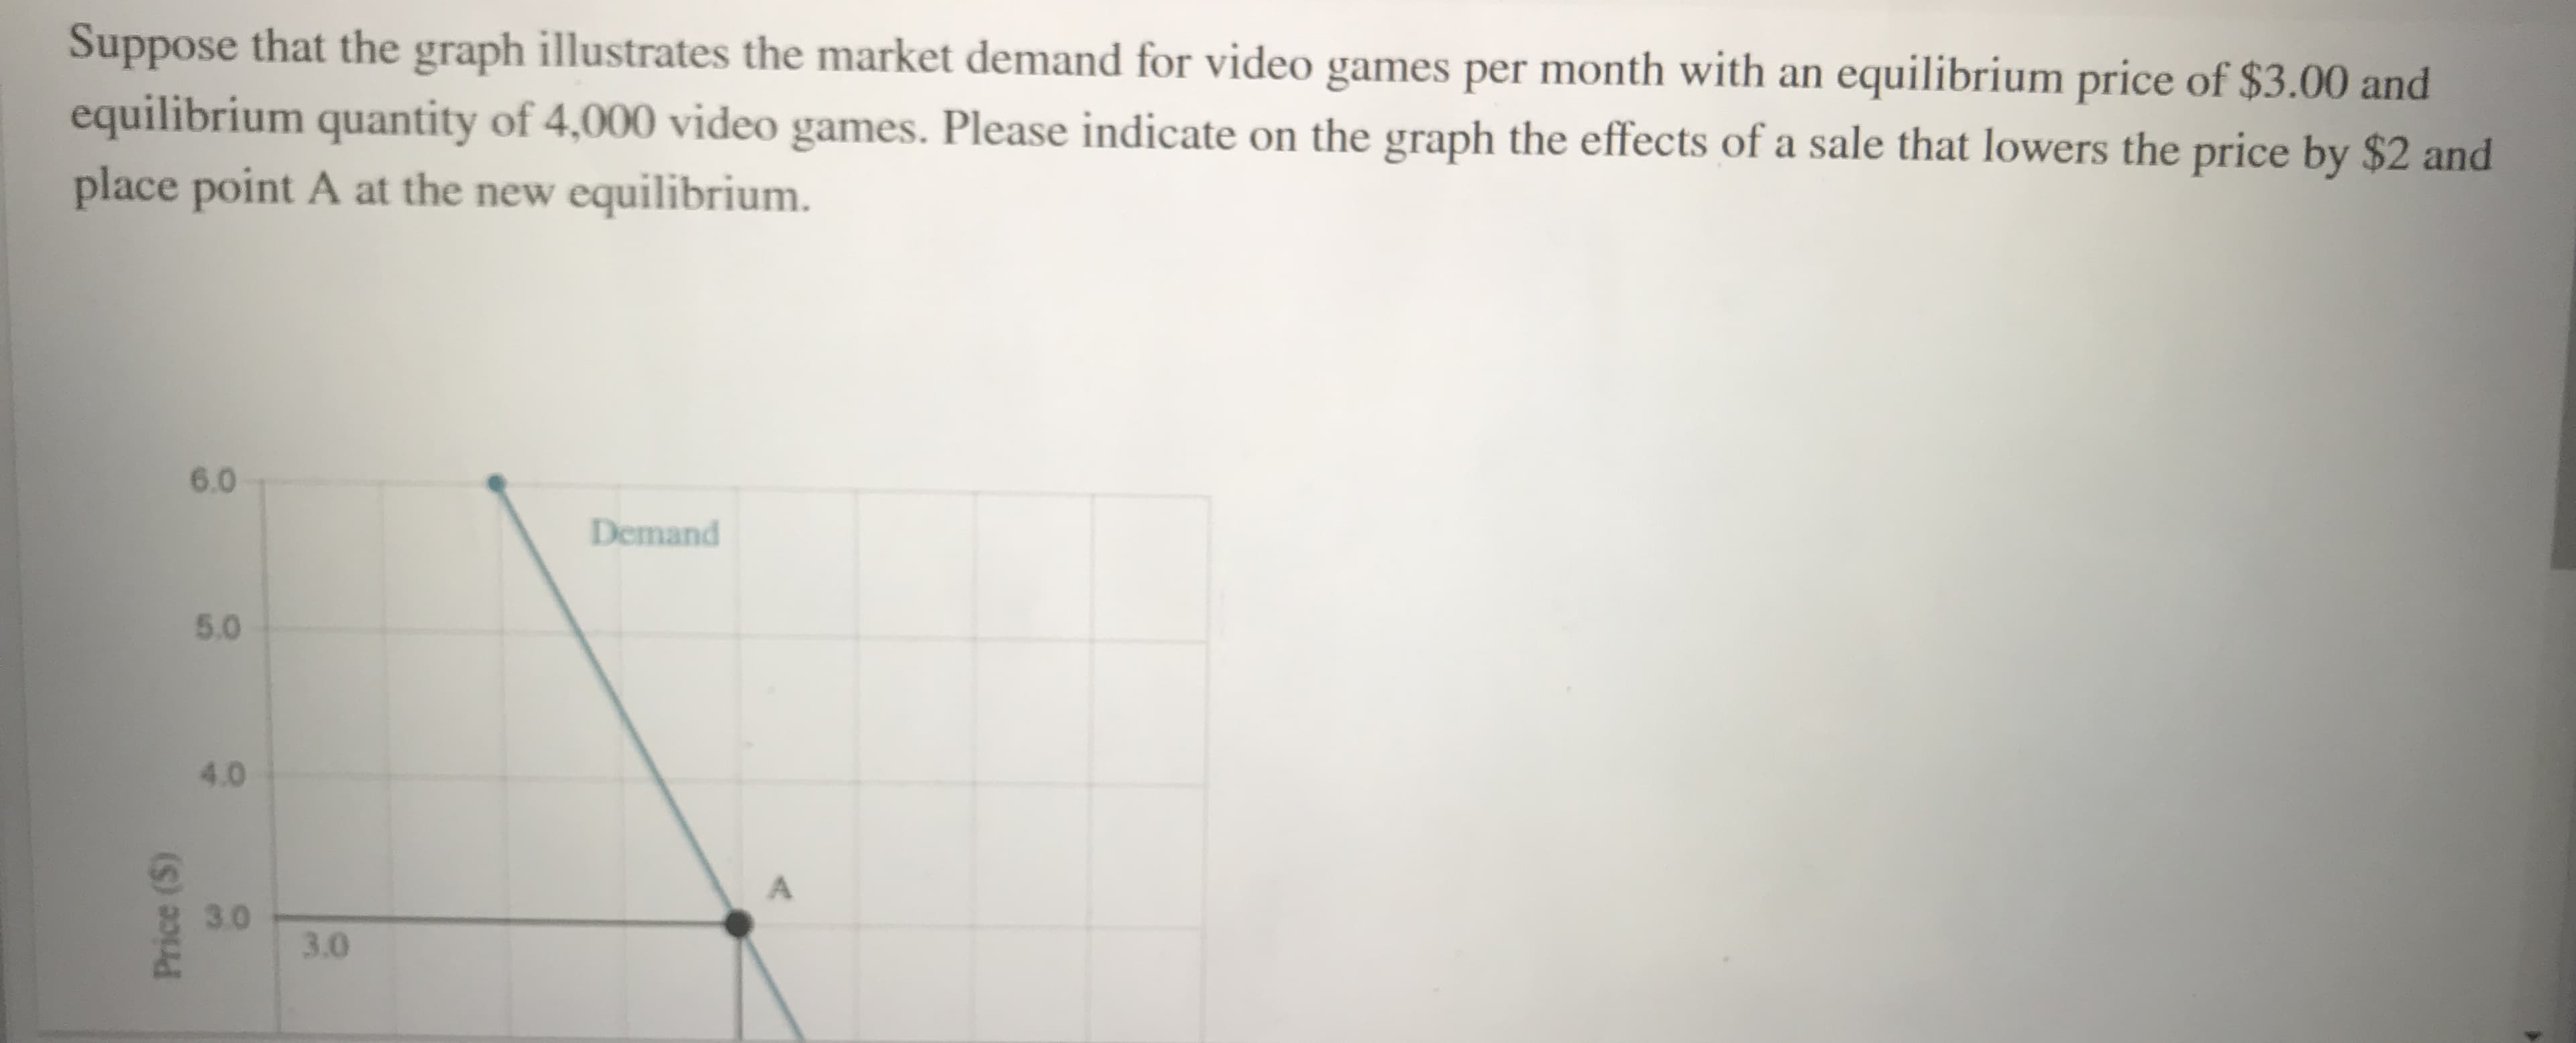 Suppose that the graph illustrates the market demand for video games per month with an equilibrium price of $3.00 and
equilibrium quantity of 4,000 video games. Please indicate on the graph the effects of a sale that lowers the price by $2 and
place point A at the new equilibrium.
6.0
Demand
5.0
4.0
3.0
3.0
Price ($)
